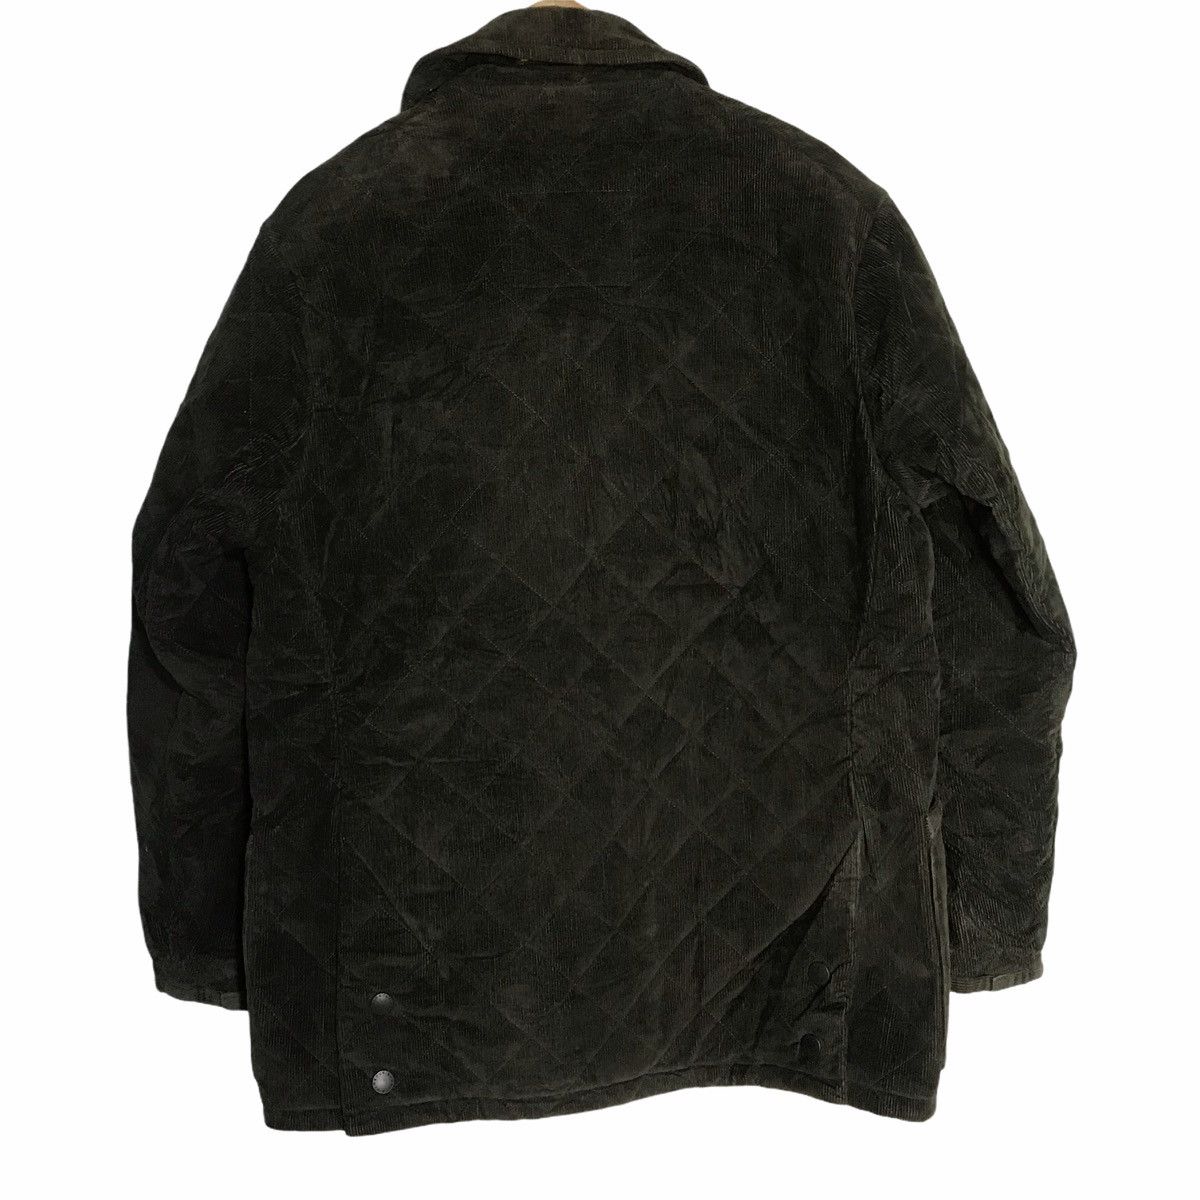 Barbour fine corduroy quilted jacket - 2